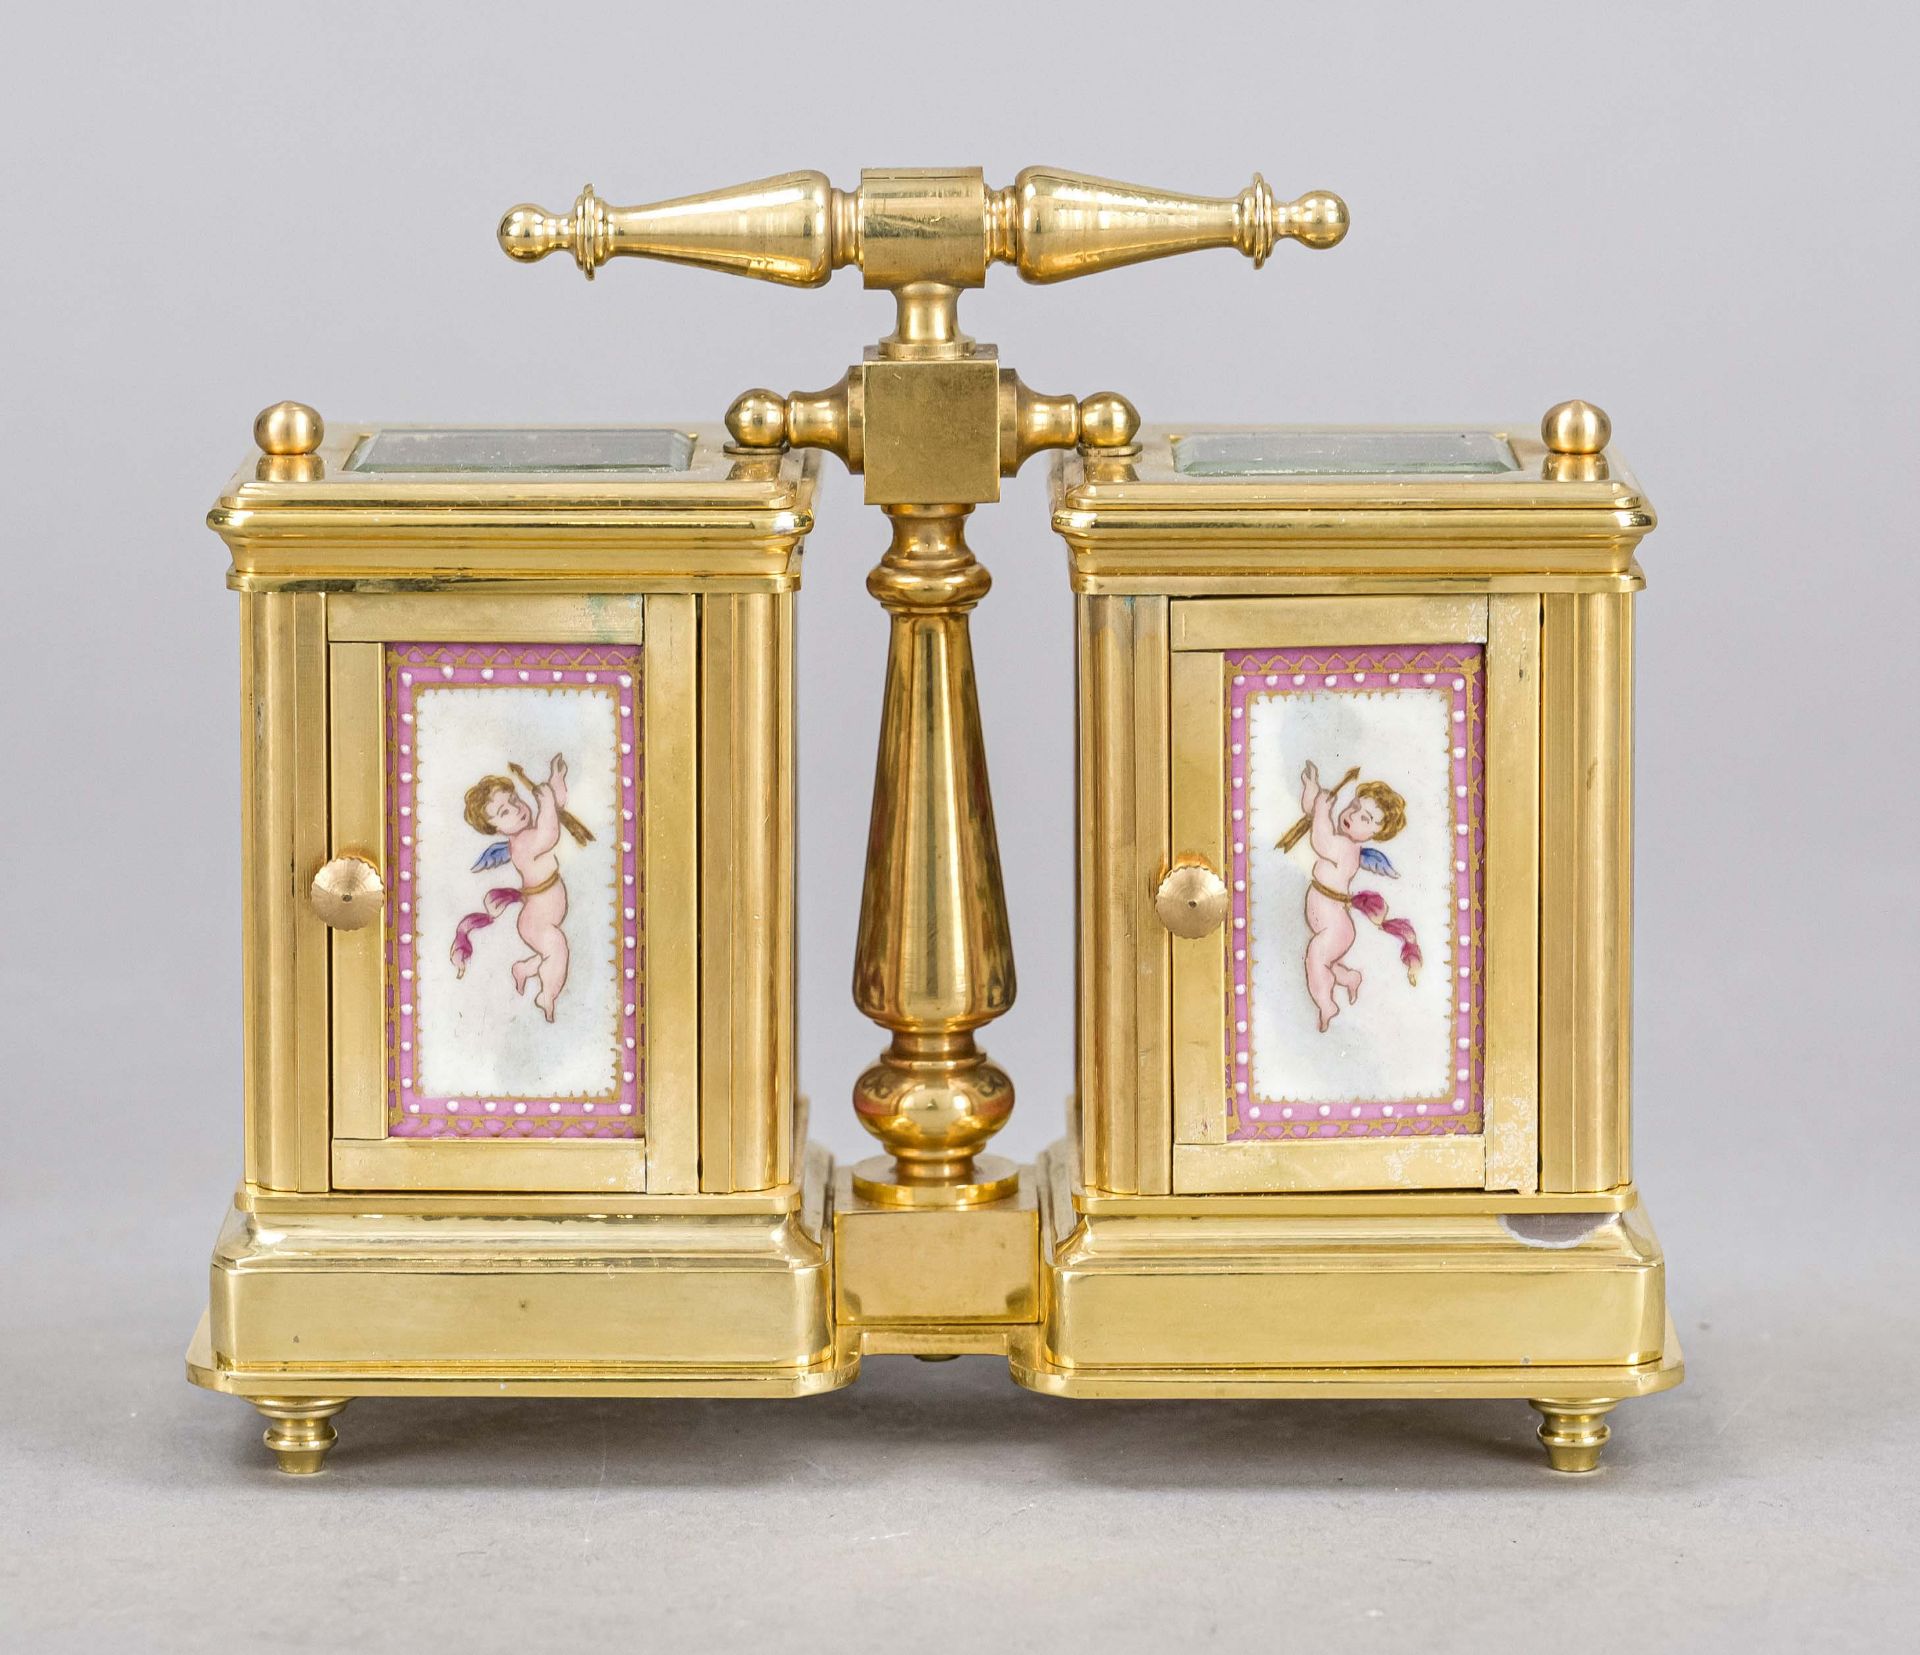 Travel alarm clock and barometer, 2nd half 20th century, gilt brass with top mounted handle, faceted - Image 3 of 4